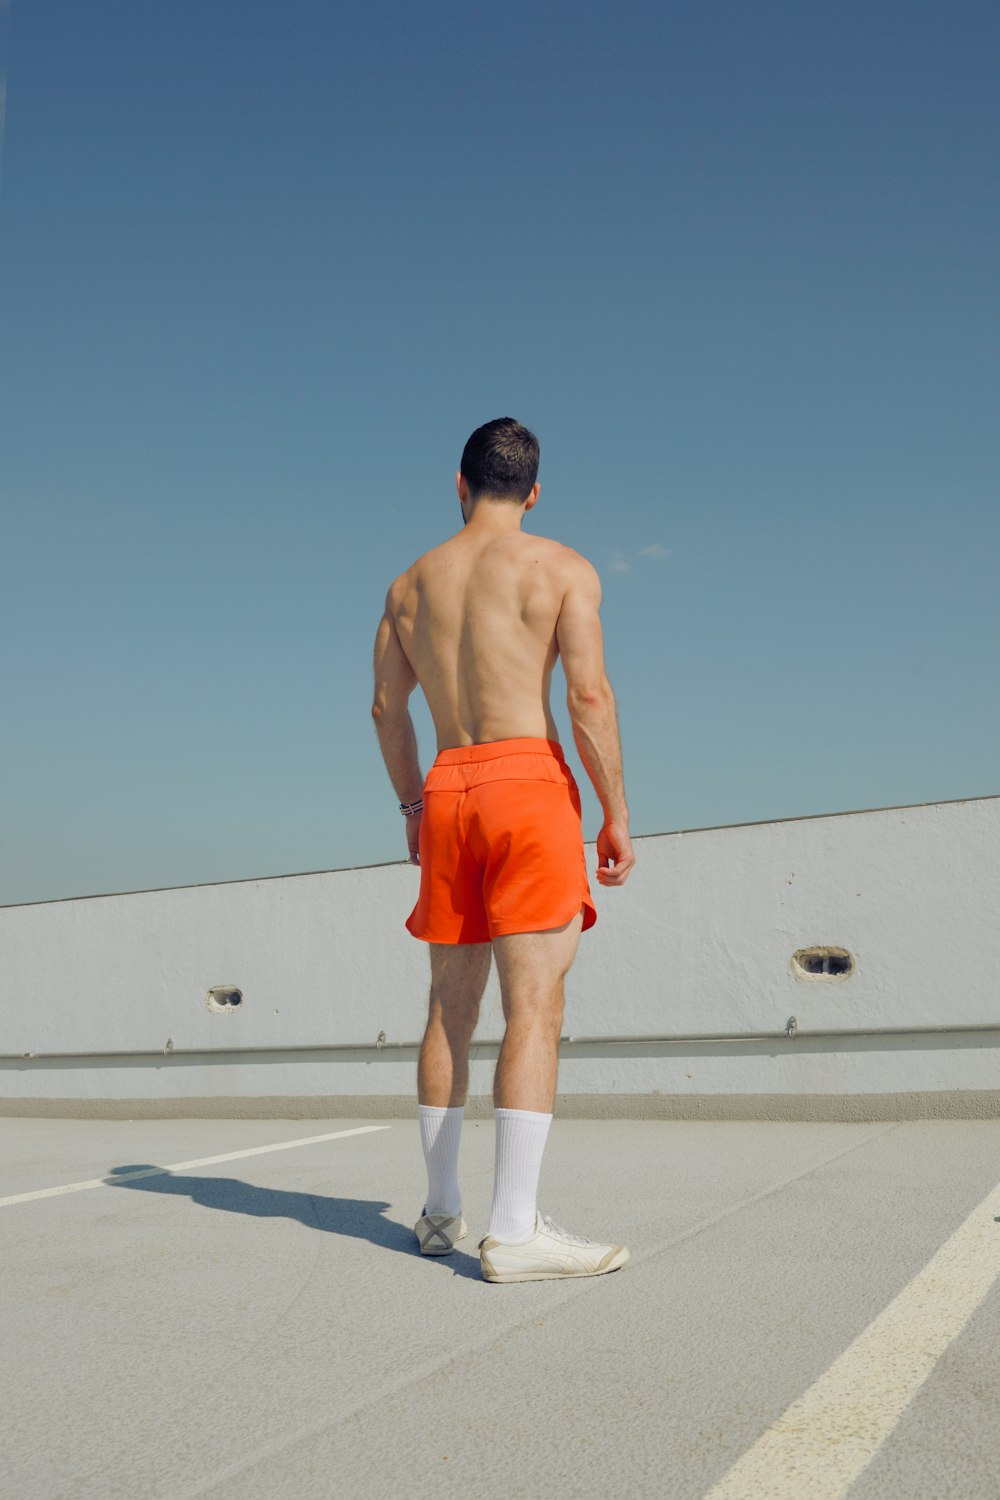 a shirtless man in an orange shorts is standing in a parking lot